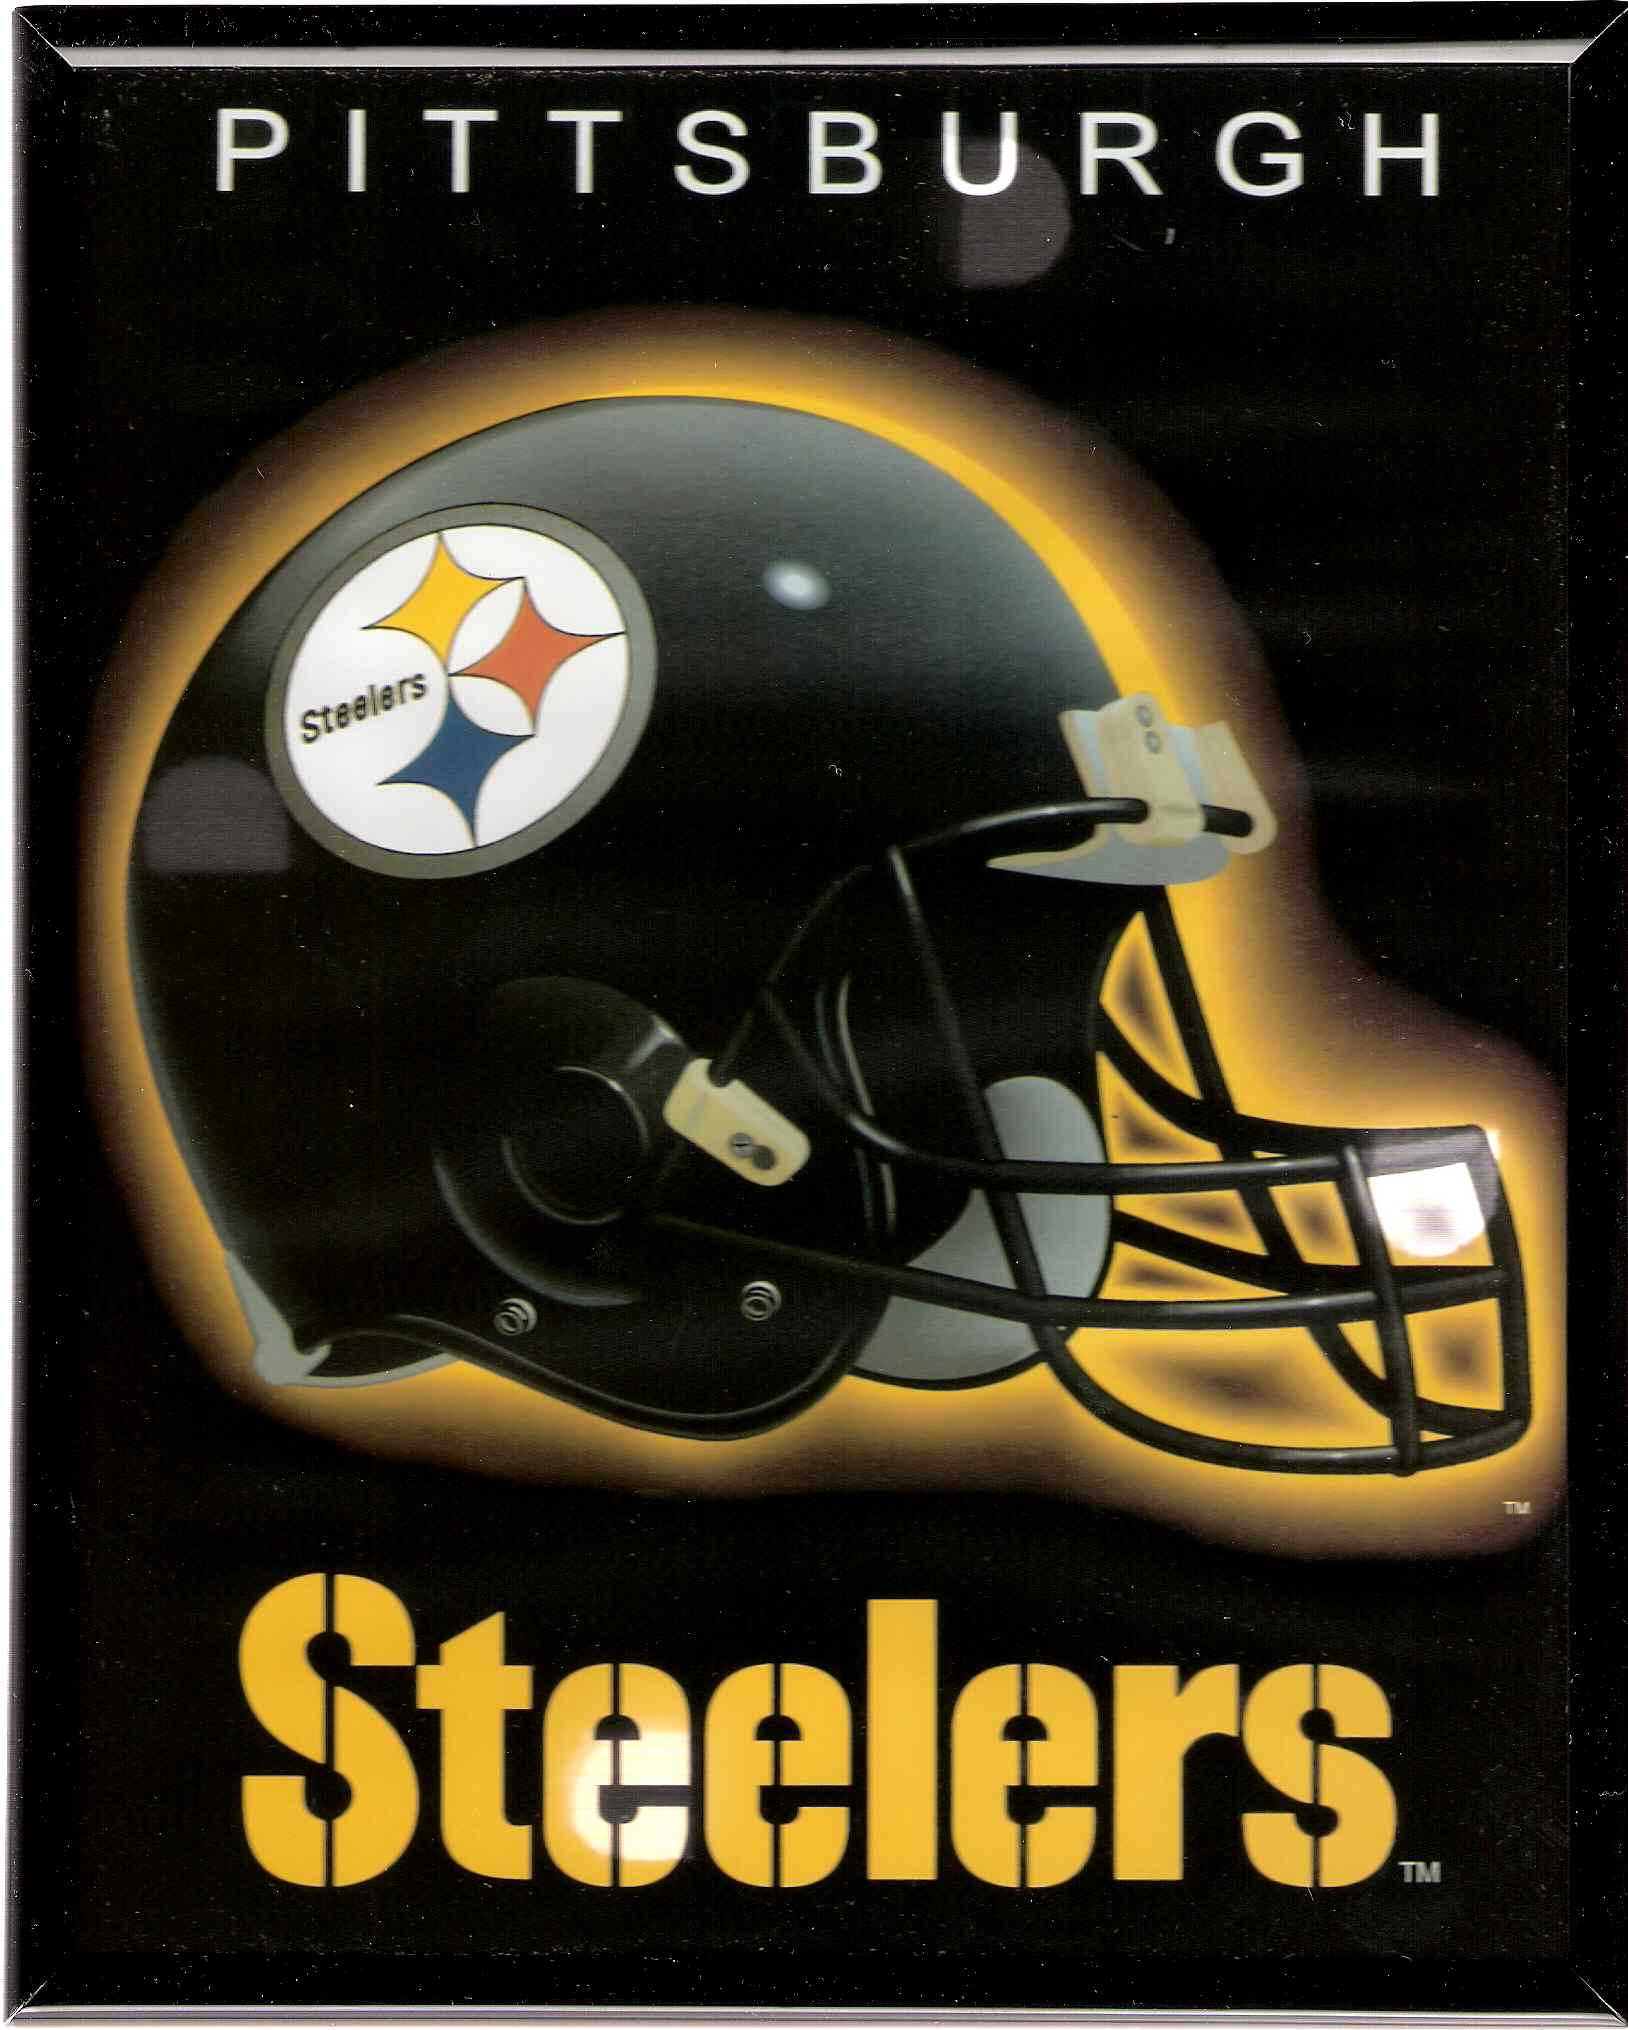 Pittsburgh Steelers Wallpaper - Logos And Uniforms Of The Pittsburgh  Steelers - 1628x2030 Wallpaper 